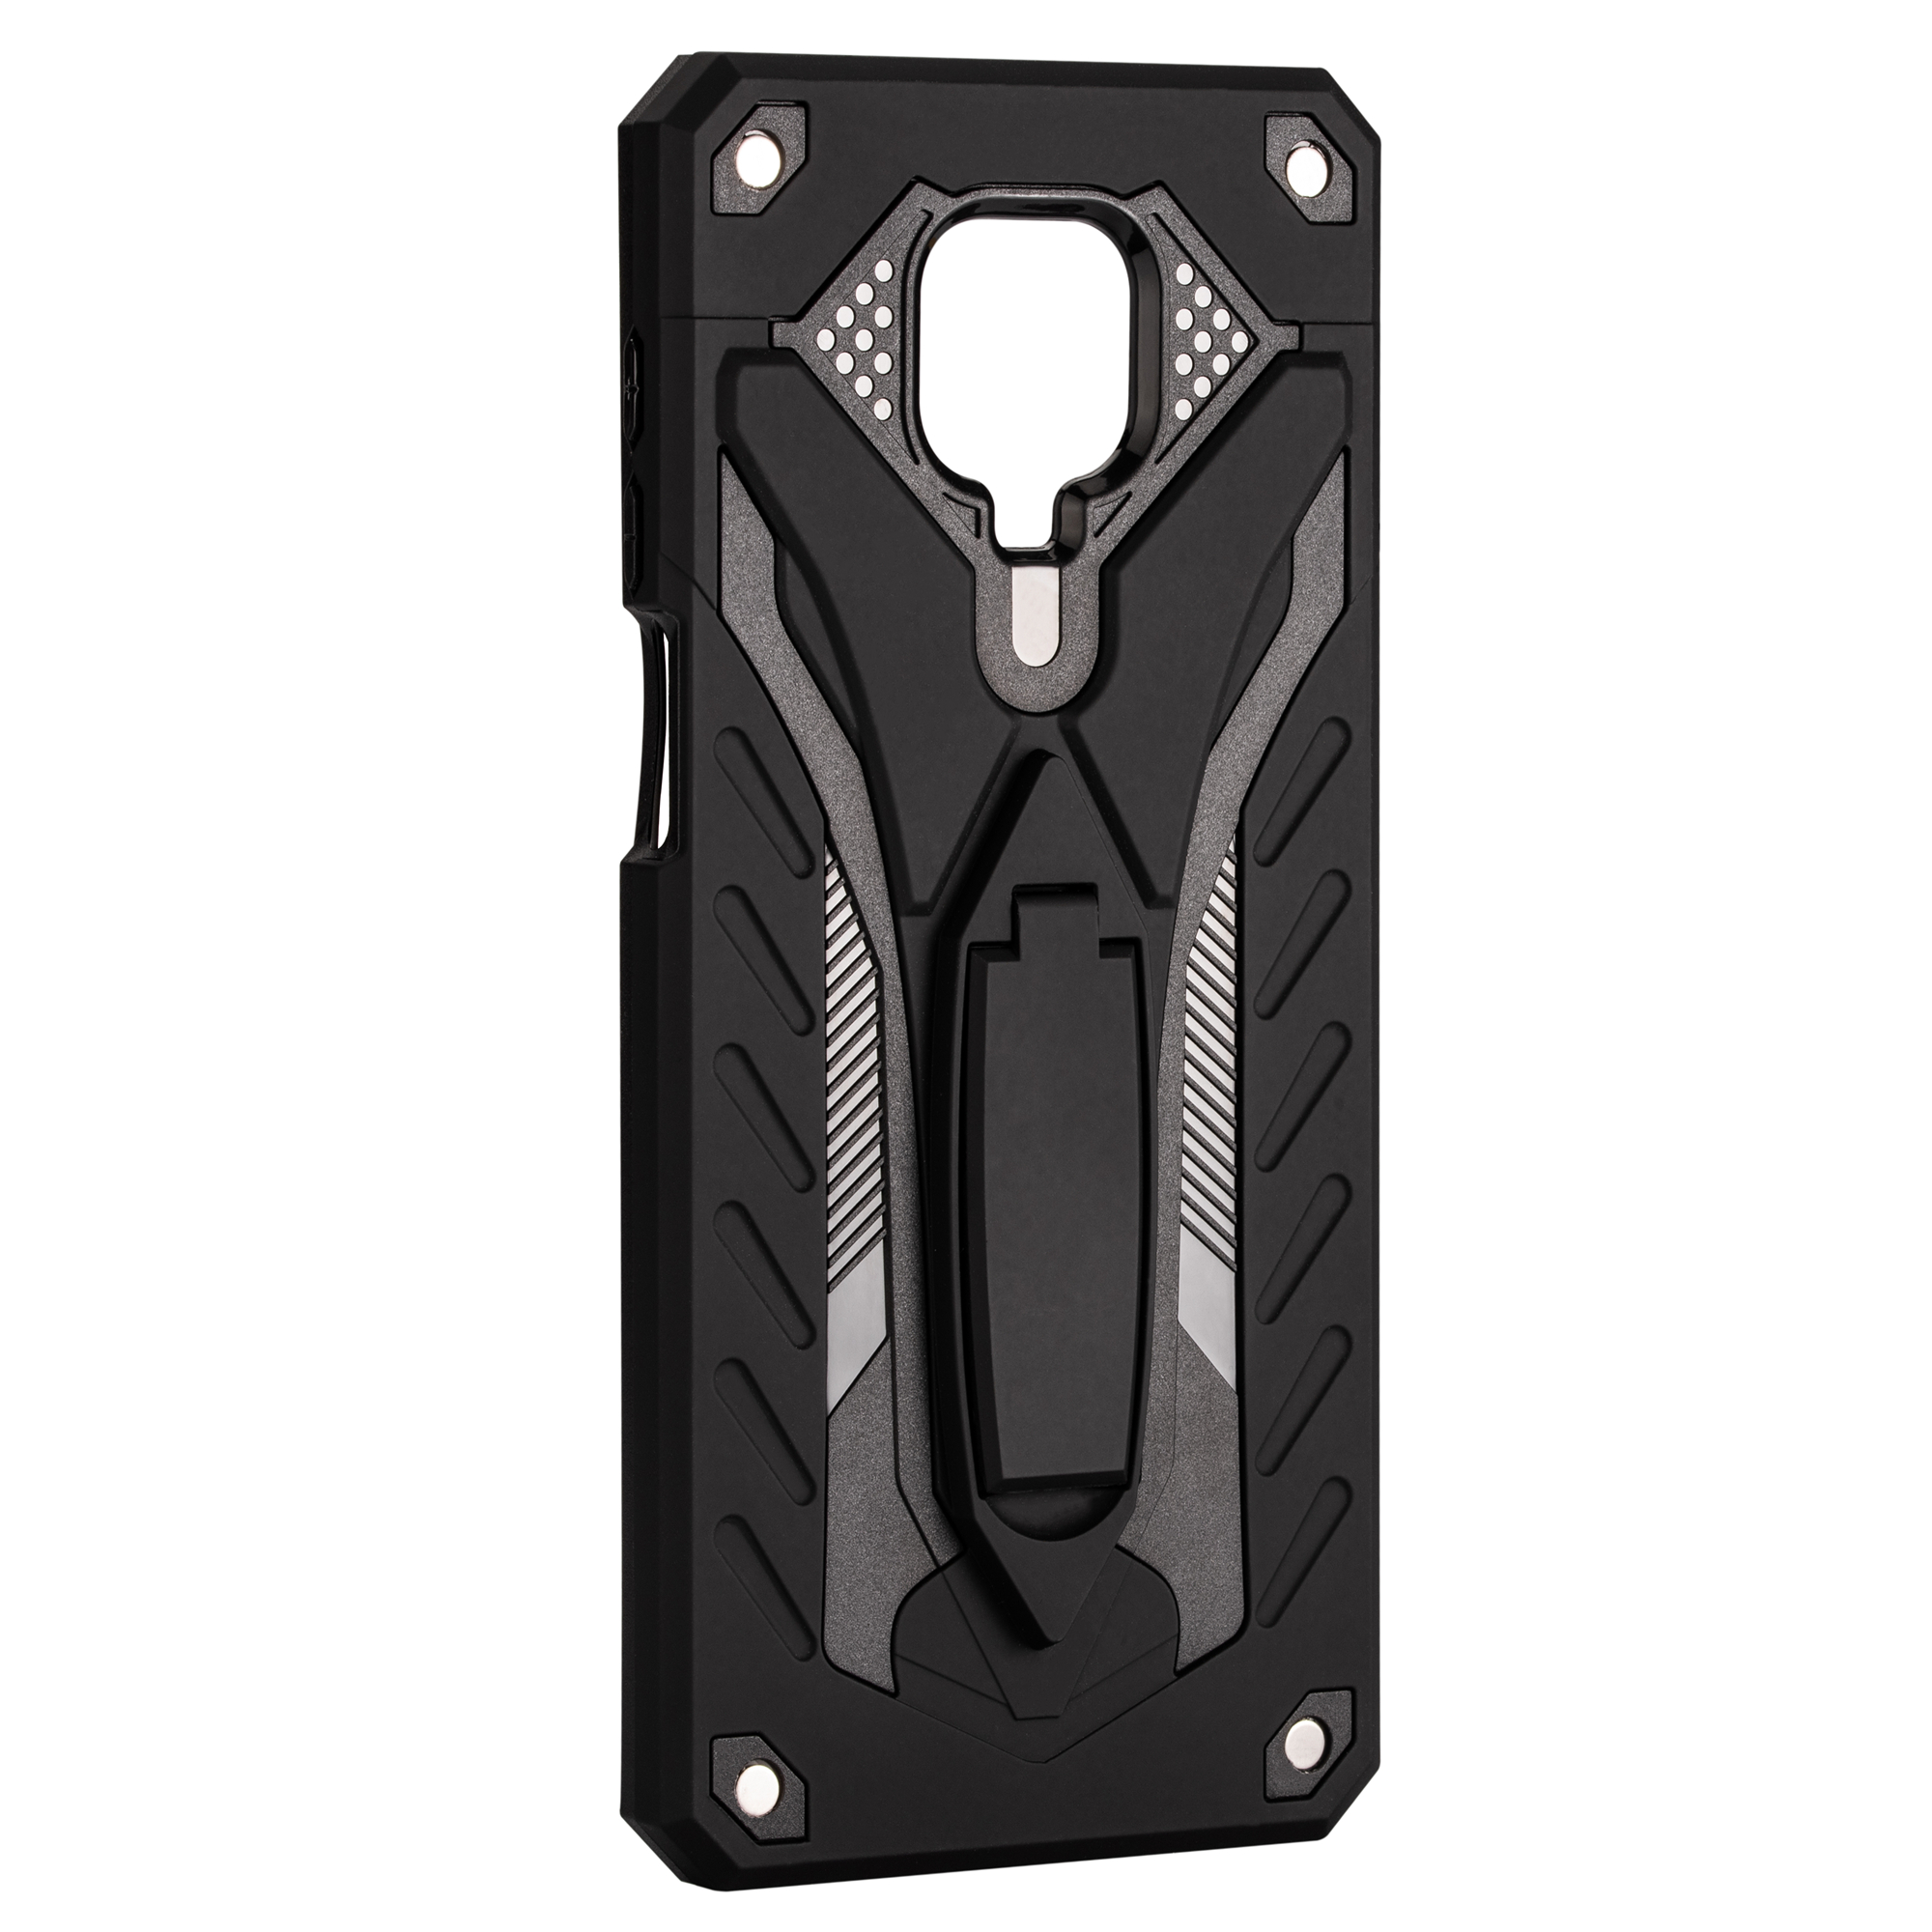 Bakeey-for-Xiaomi-Redmi-Note-9S--Redmi-Note-9-Pro-Case-Armor-Shockproof-Anti-Fingerprint-with-Ring-B-1726460-3